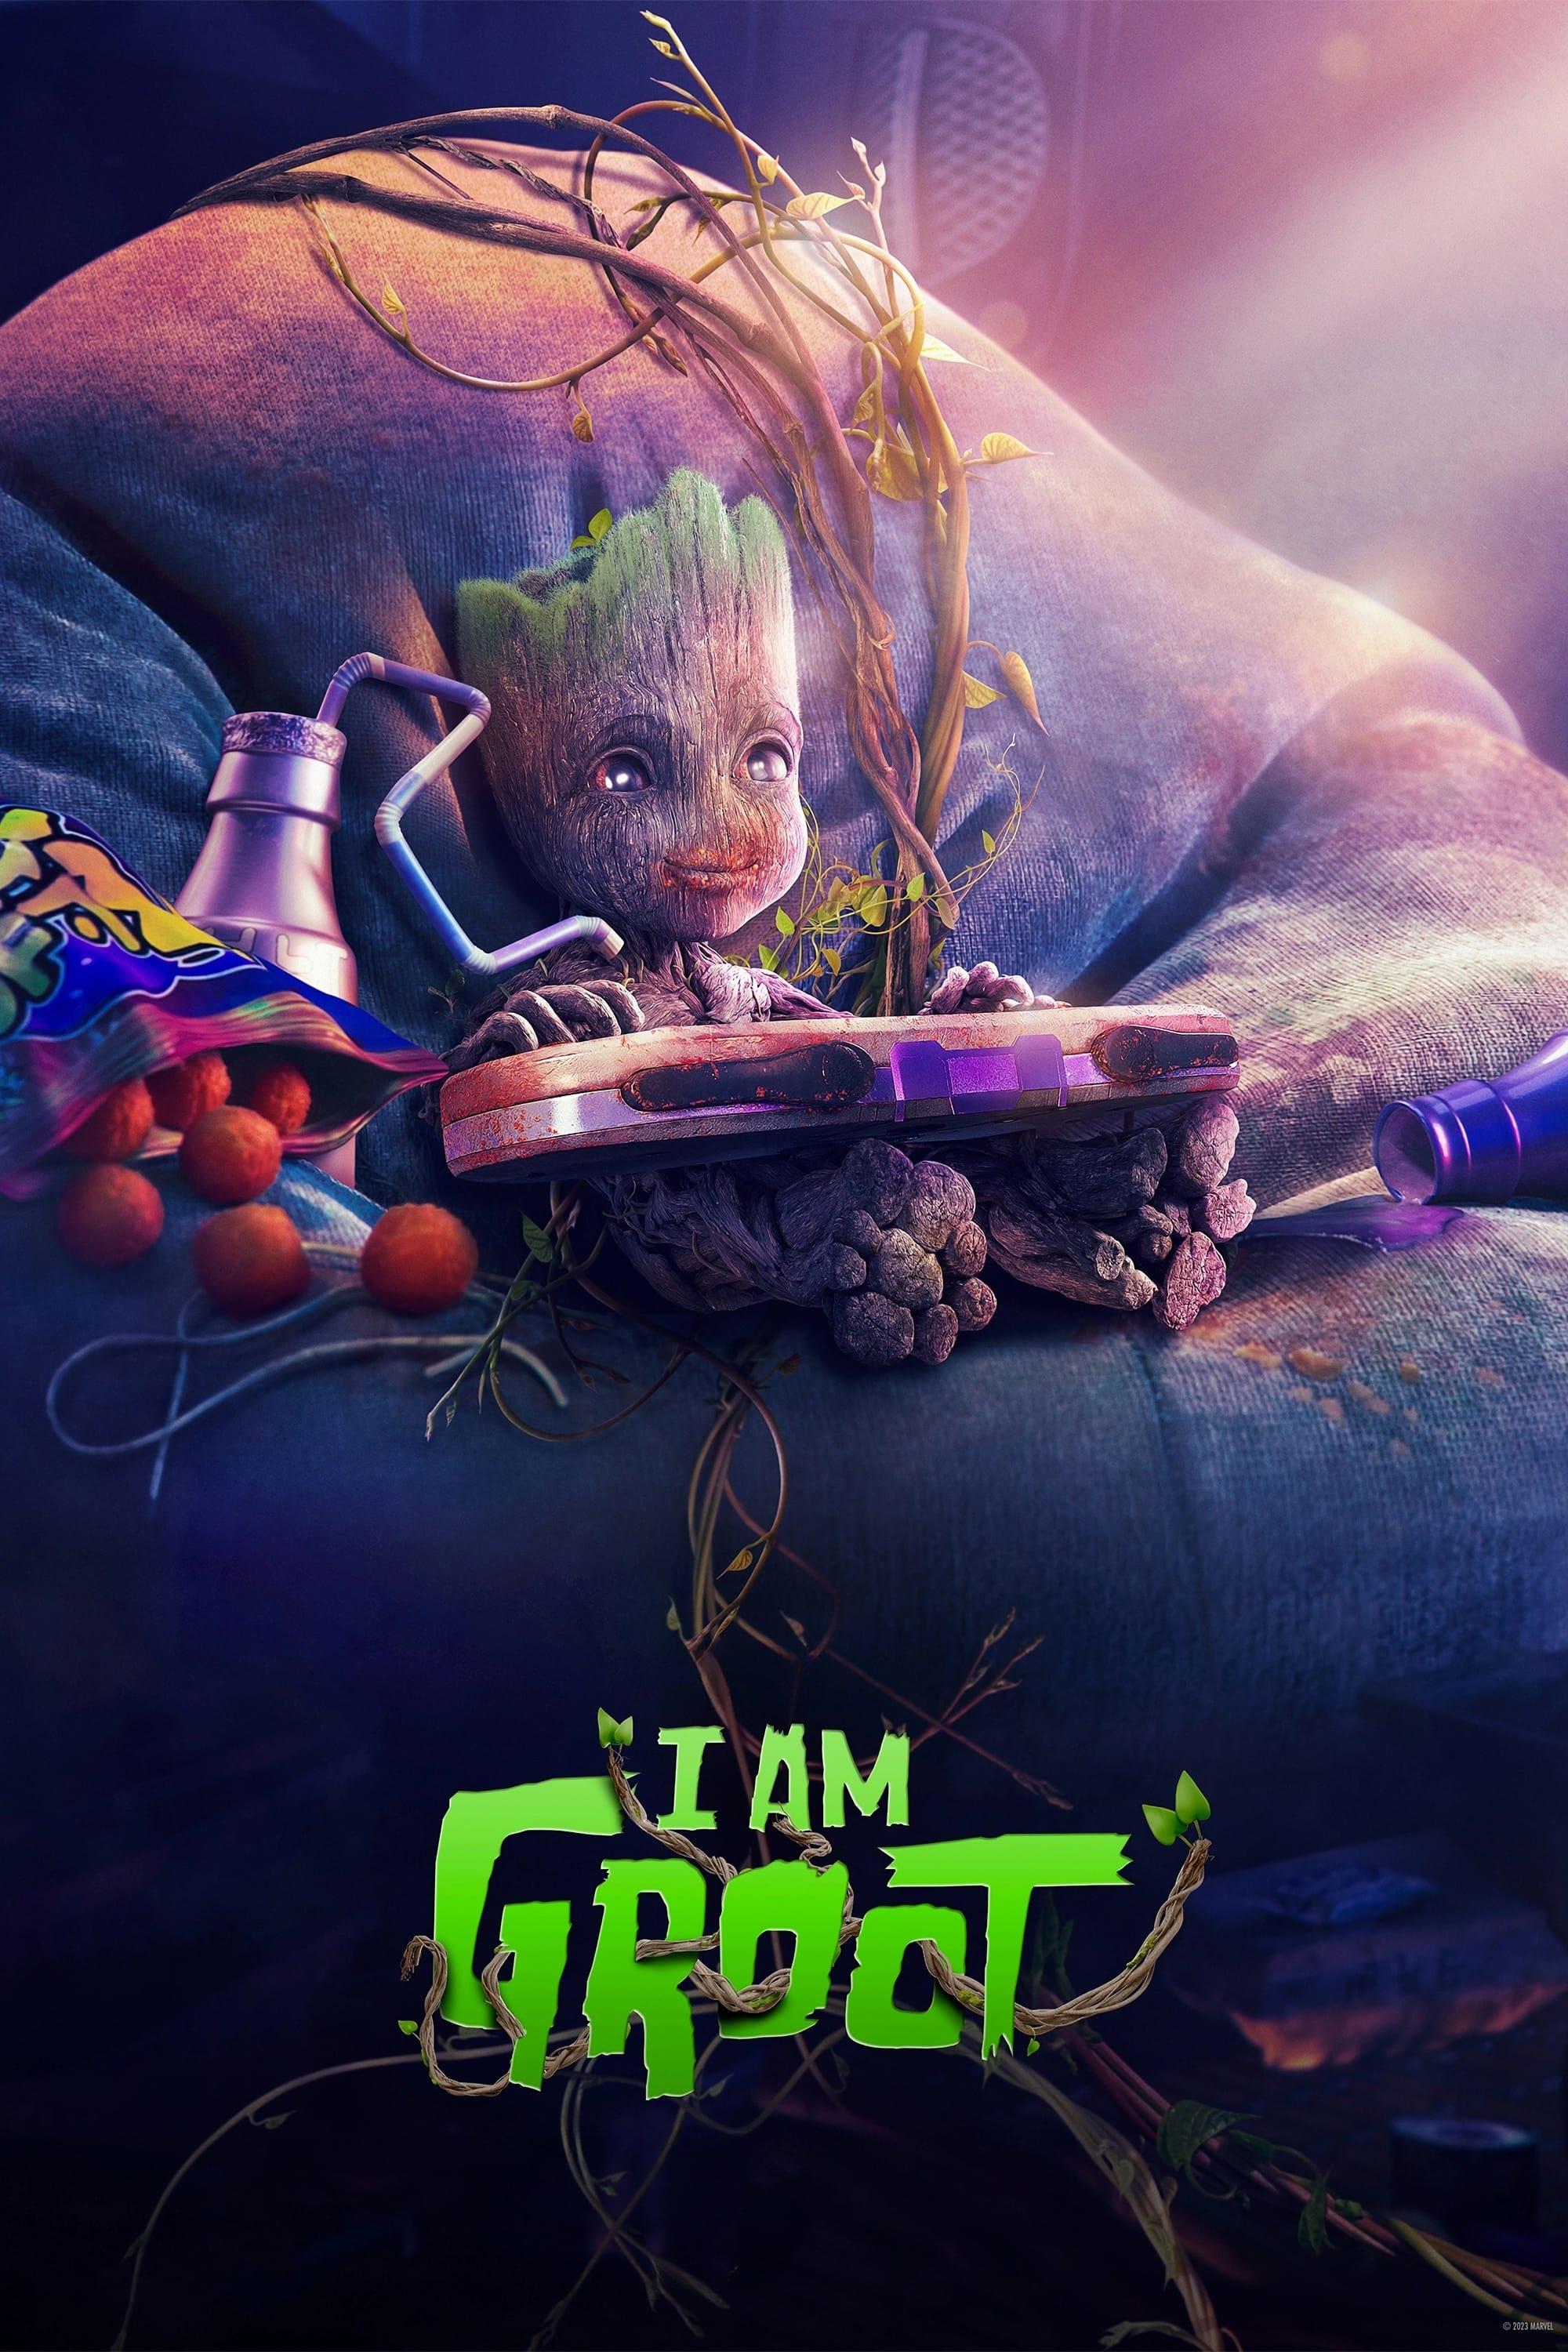 I Am Groot poster